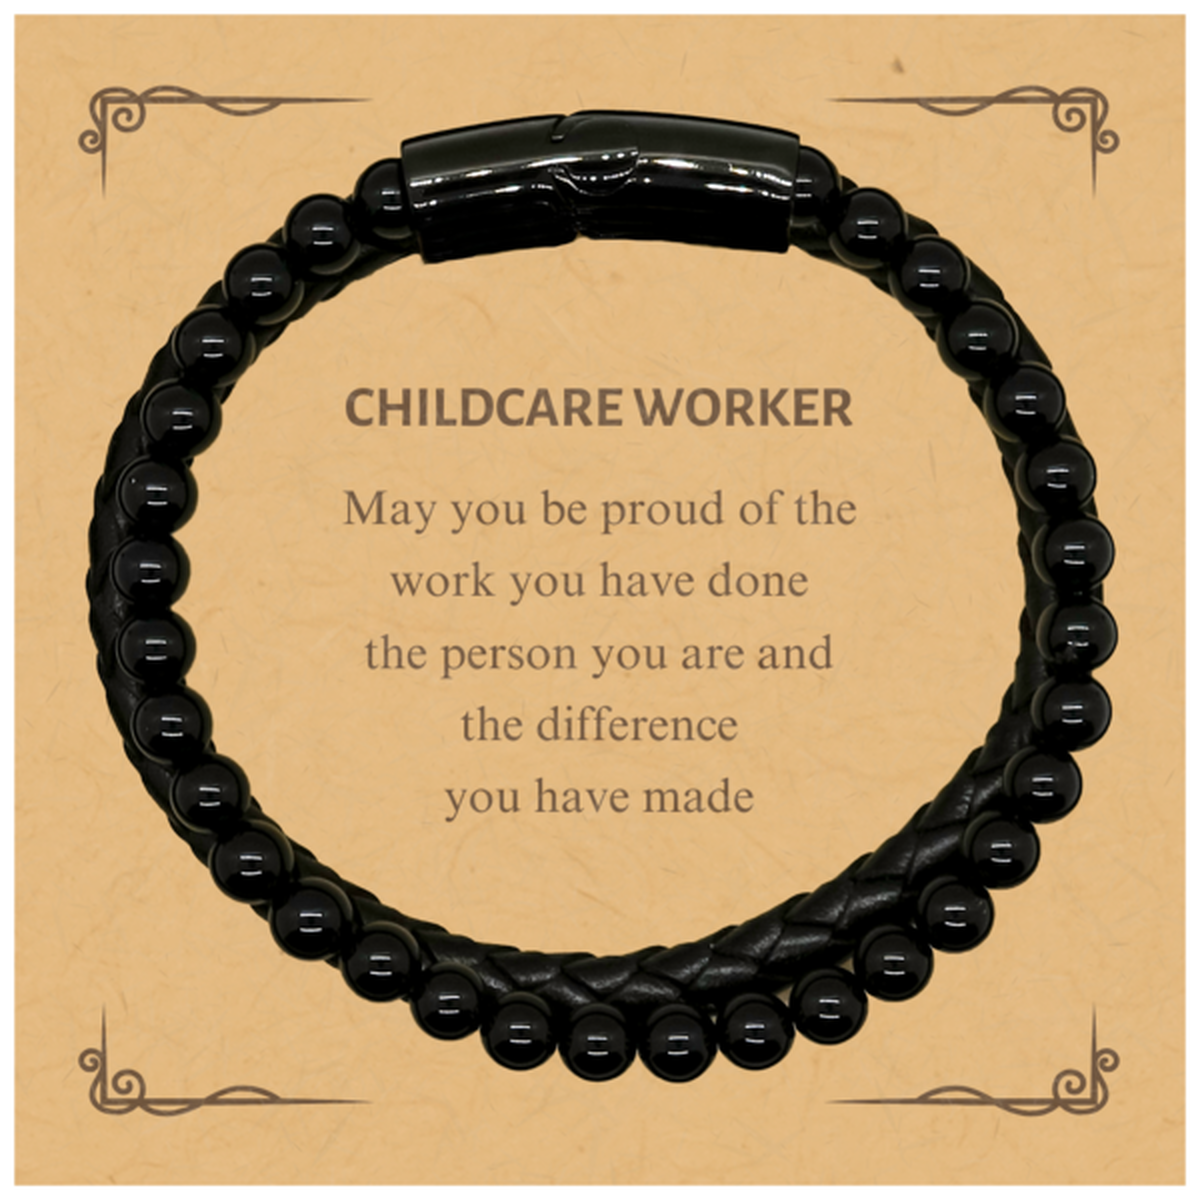 Childcare Worker May you be proud of the work you have done, Retirement Childcare Worker Stone Leather Bracelets for Colleague Appreciation Gifts Amazing for Childcare Worker